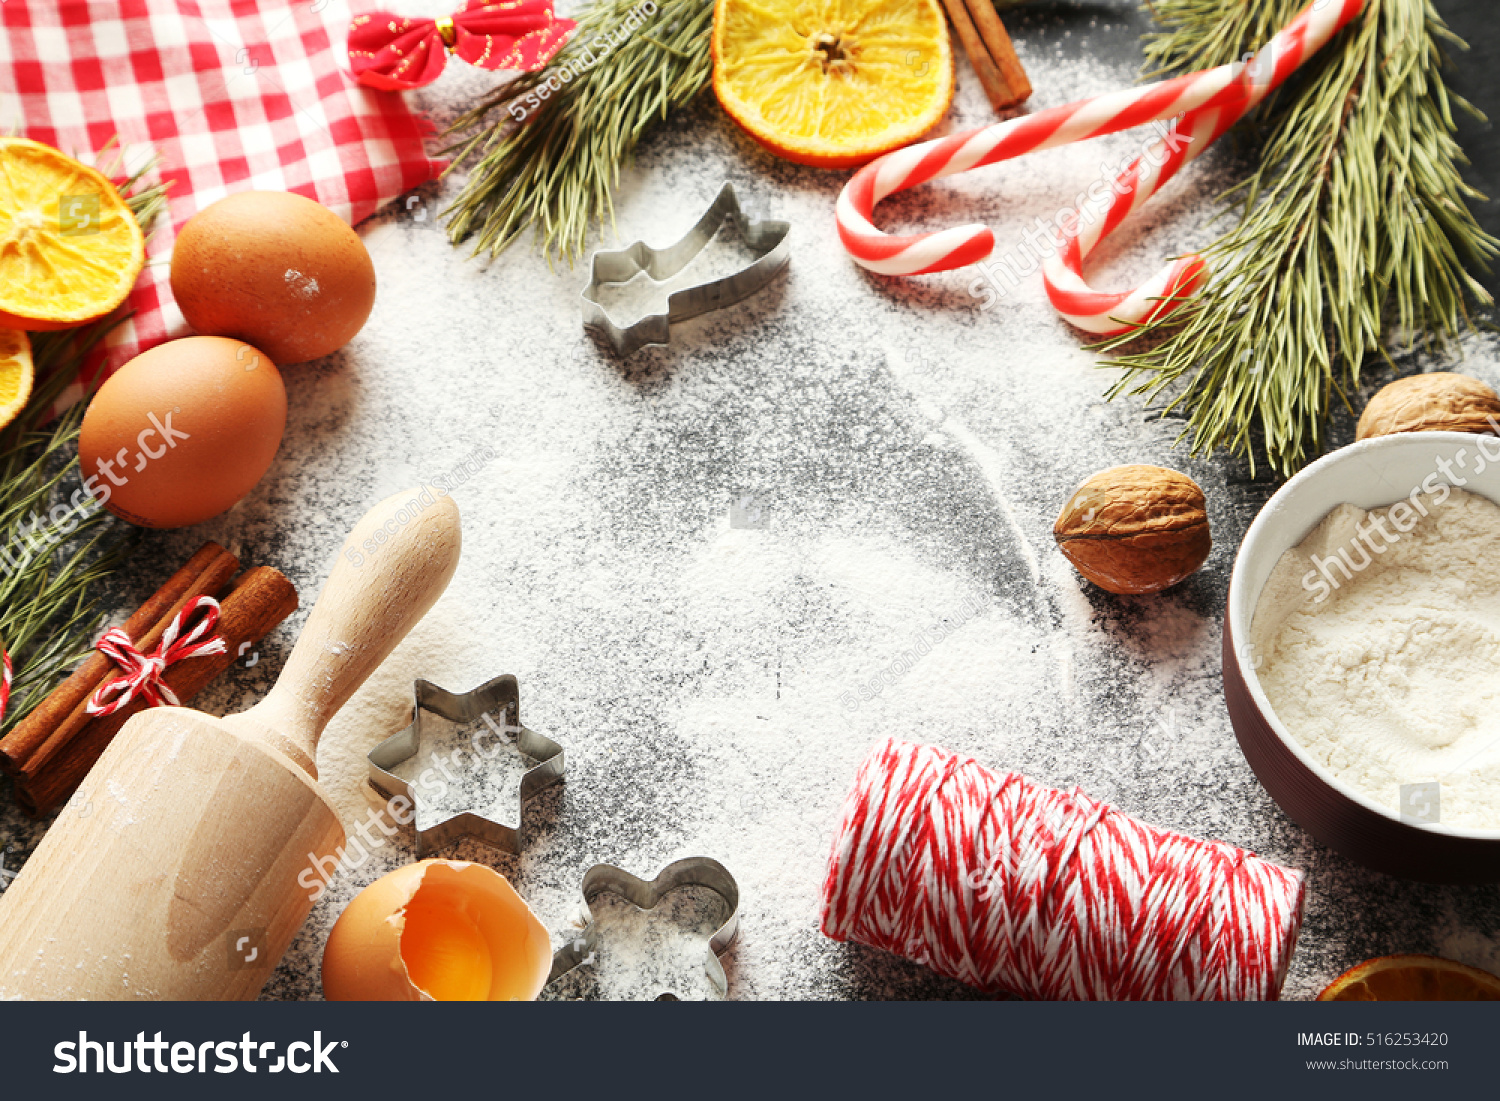 Christmas tree branch with dried oranges, cinnamon and flour on wooden table #516253420